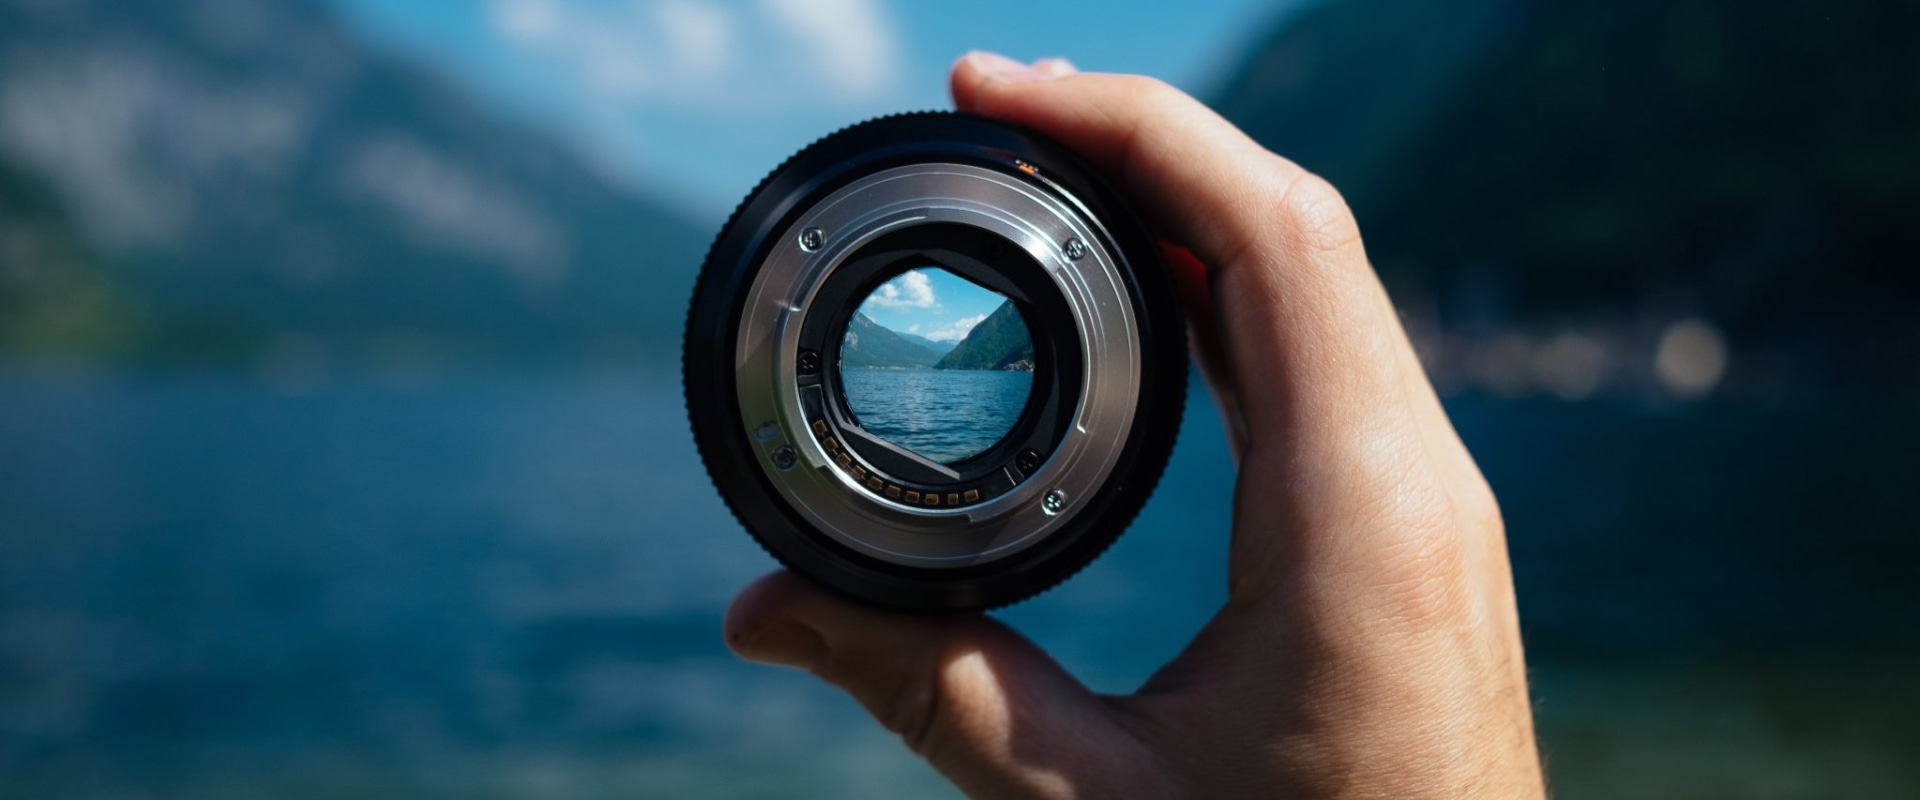 7 Types of Photography to Master for a Successful Career